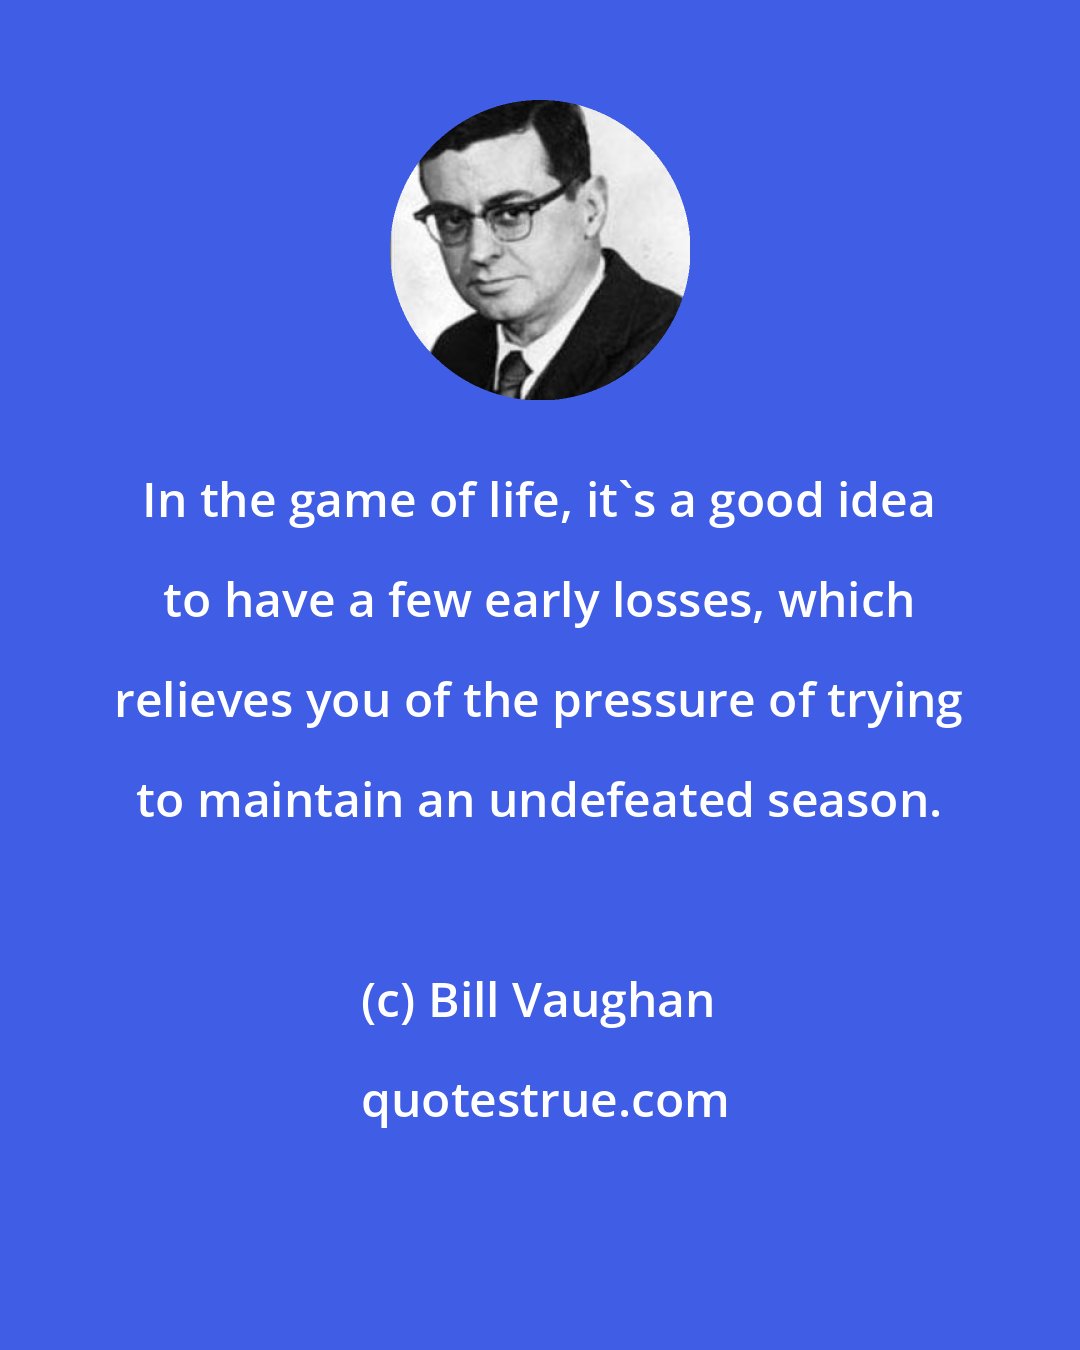 Bill Vaughan: In the game of life, it's a good idea to have a few early losses, which relieves you of the pressure of trying to maintain an undefeated season.